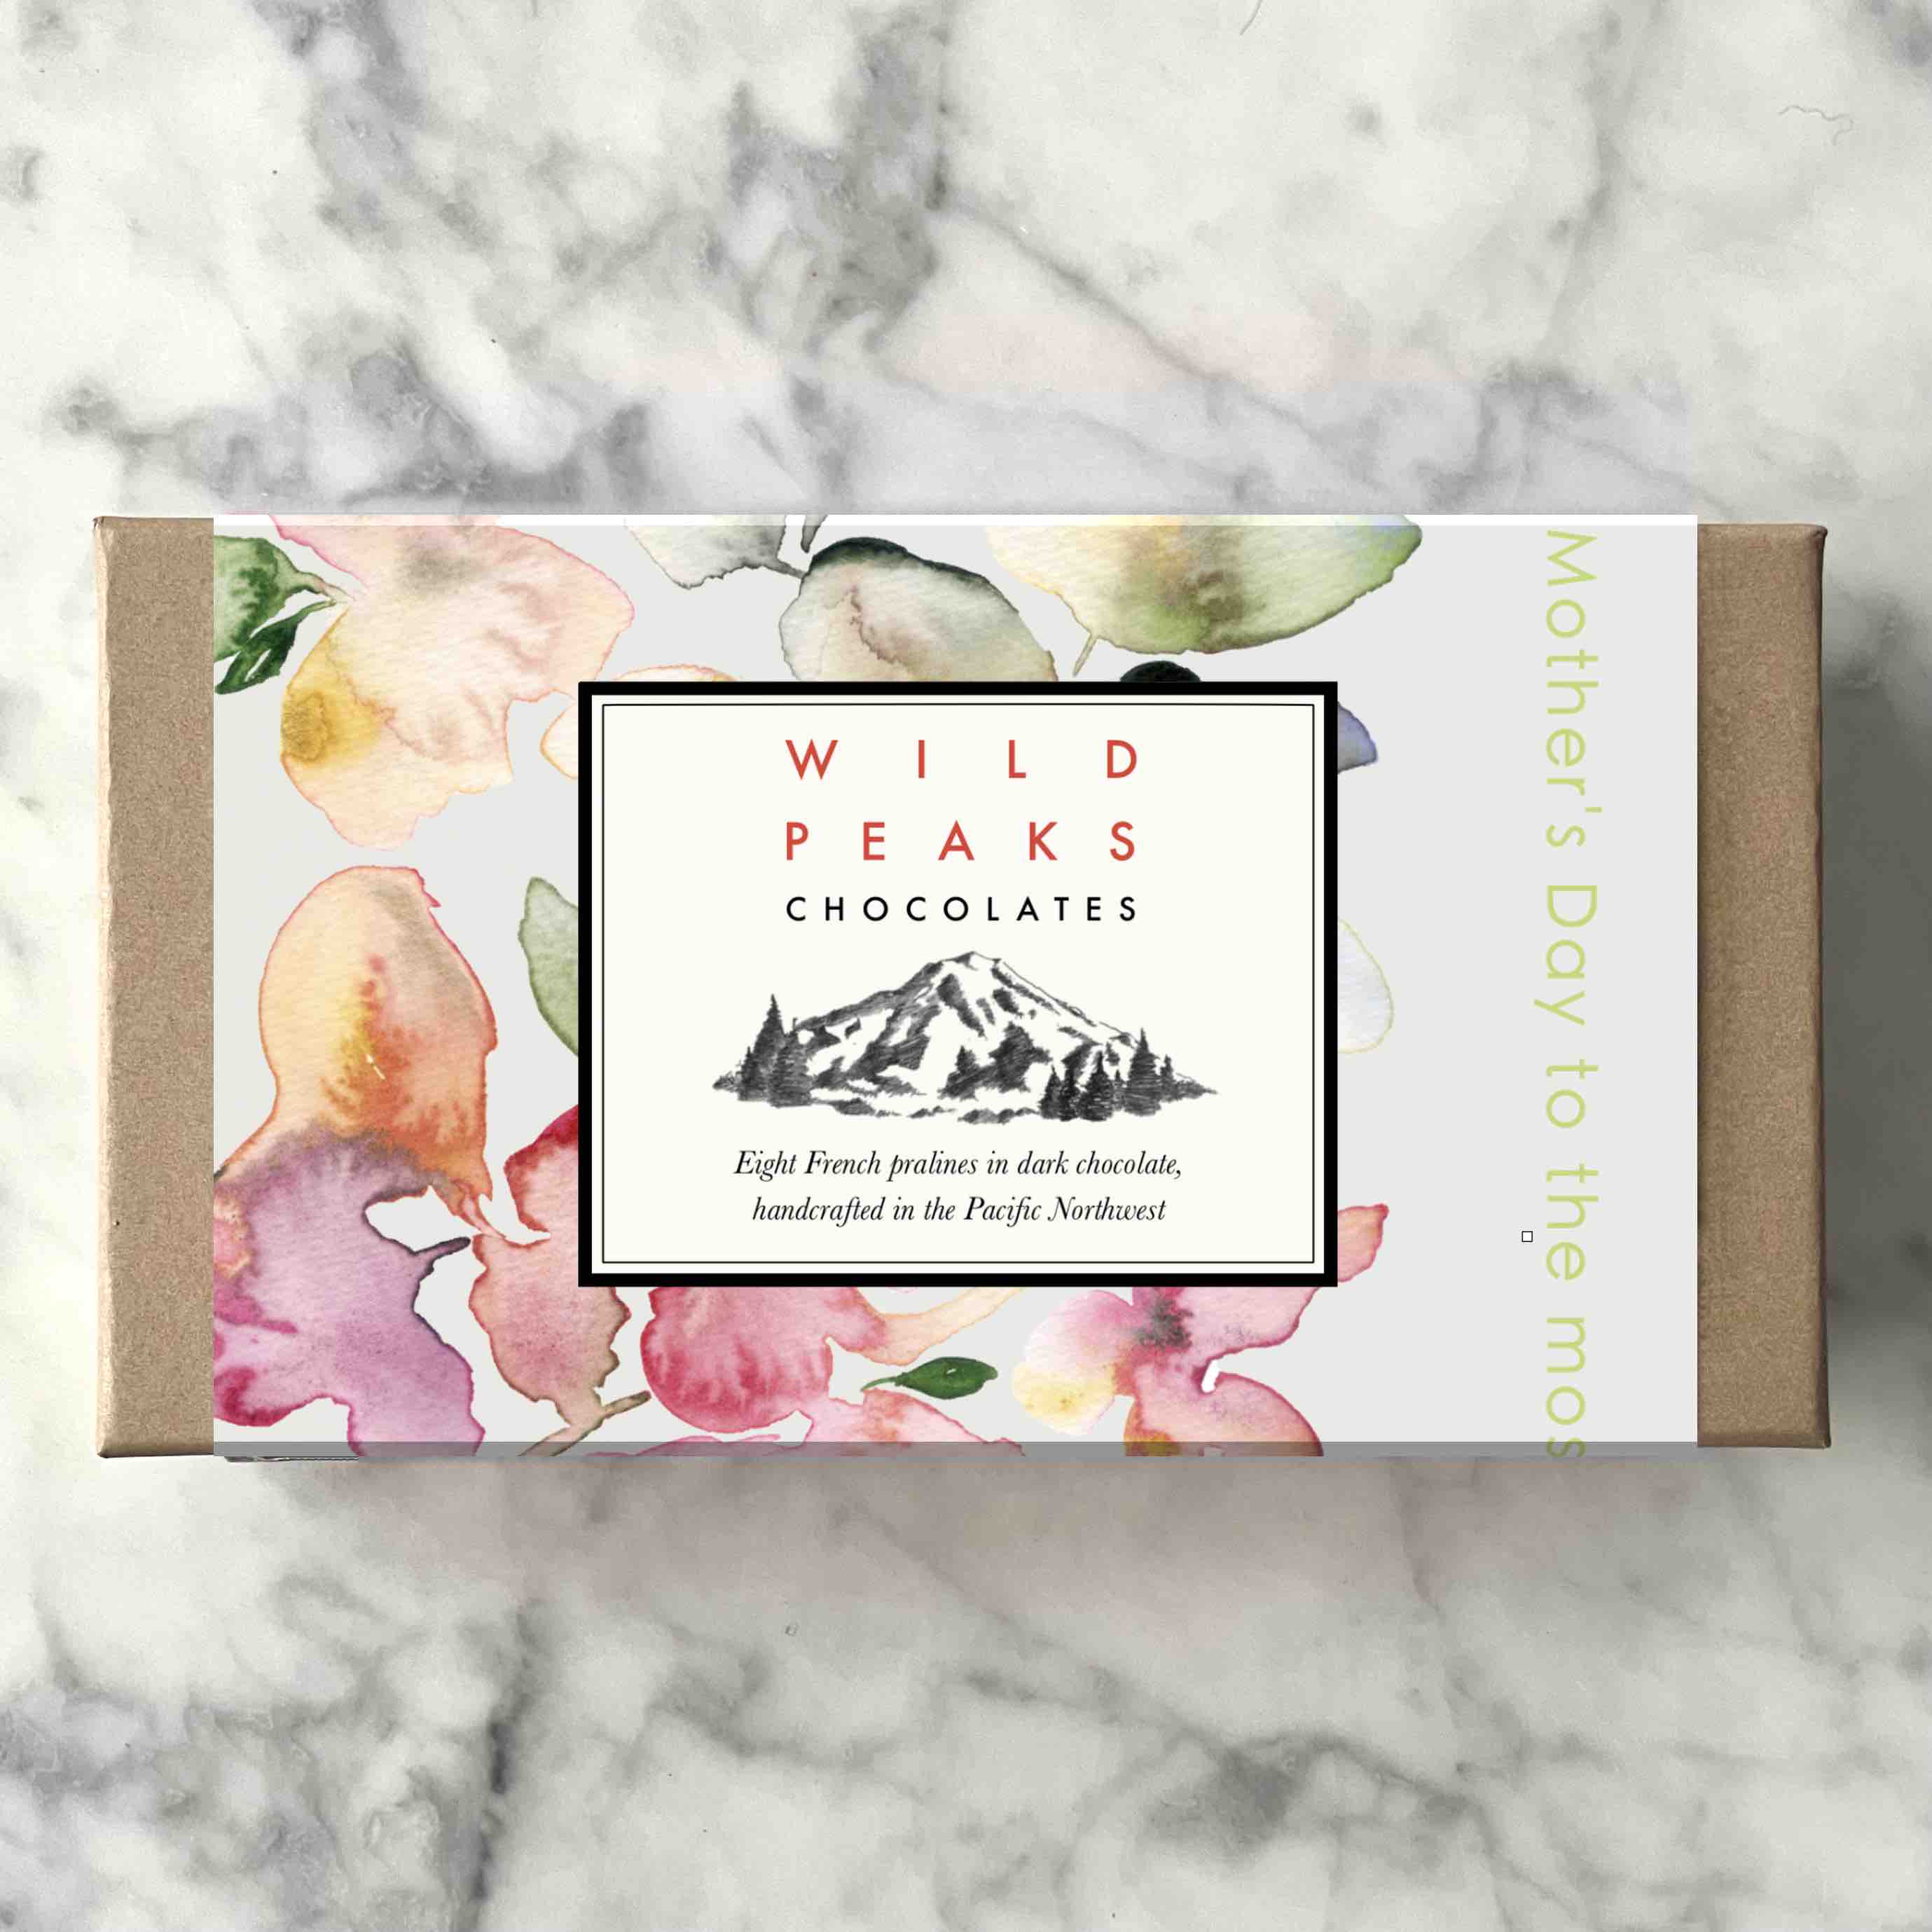 Mother's Day chocolate box of 8 by Wild Peaks Chocolates (PNW - Seattle area)